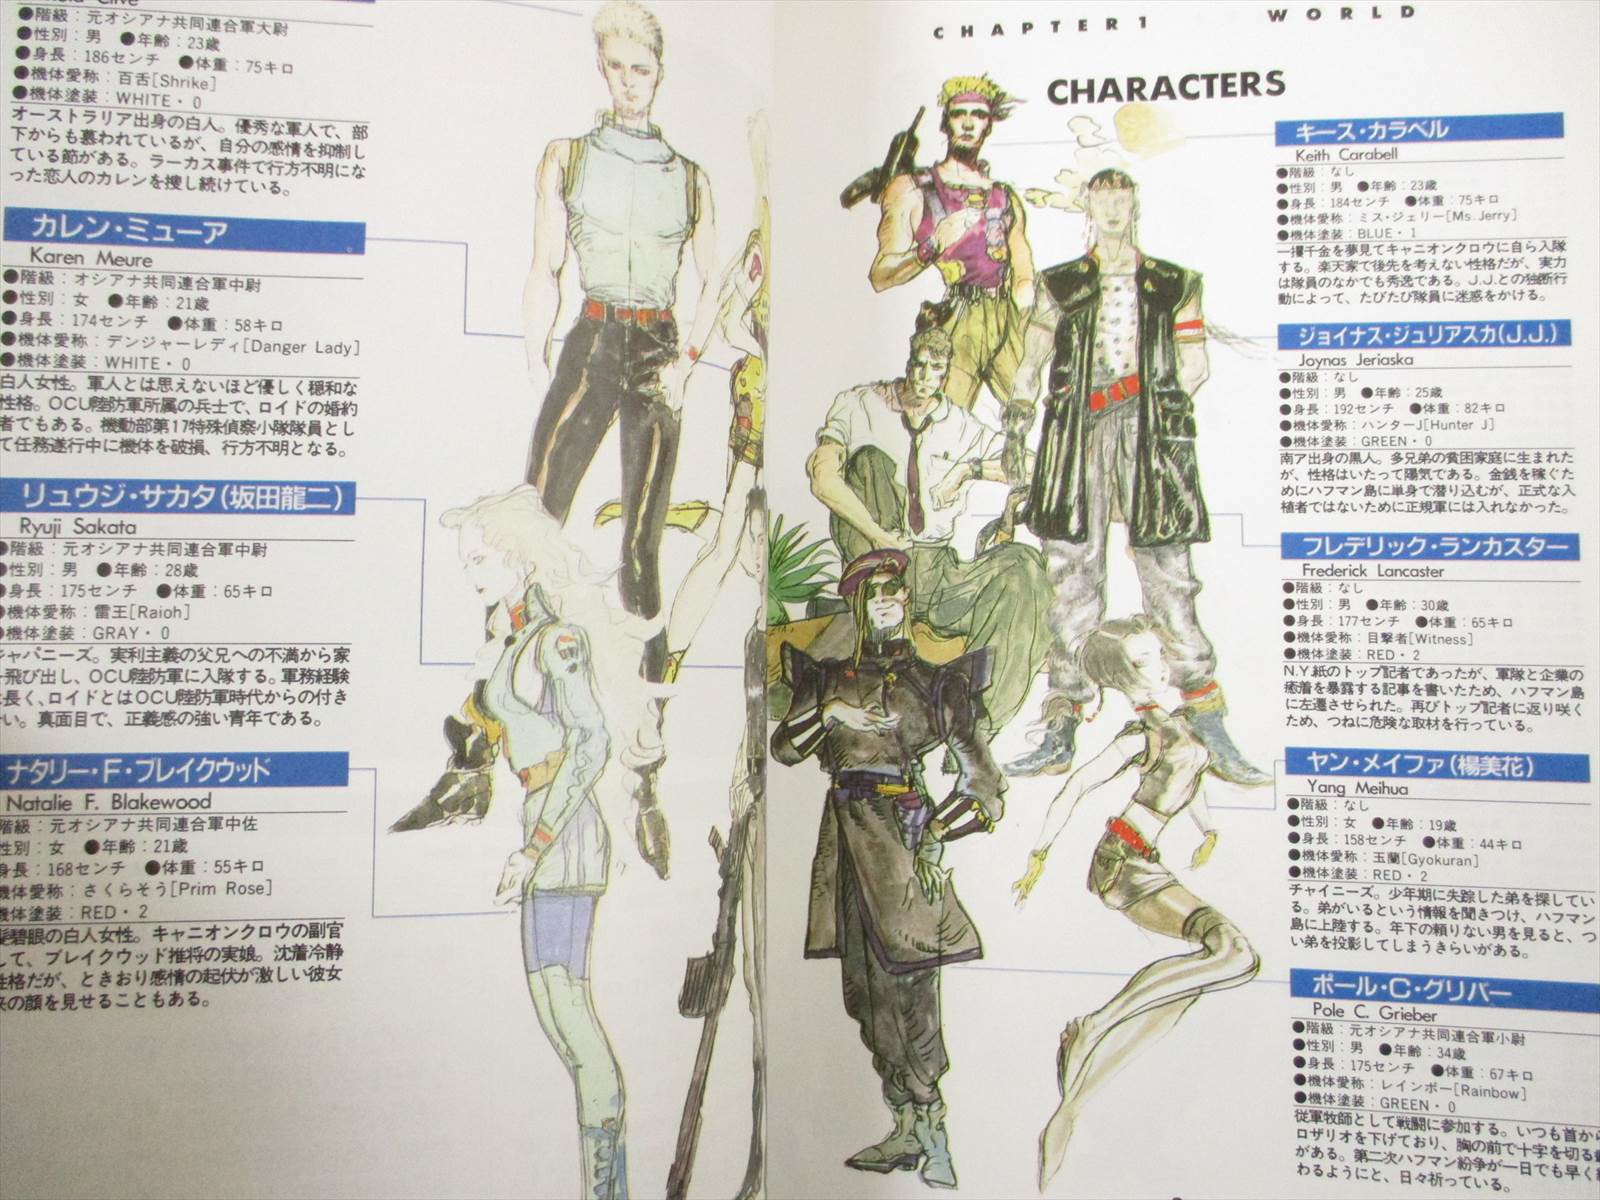 Used Front Mission Official Guide Vol 2 Sfc Book Ap79 Animation Art Characters Other Anime Collectibles Japanese Anime